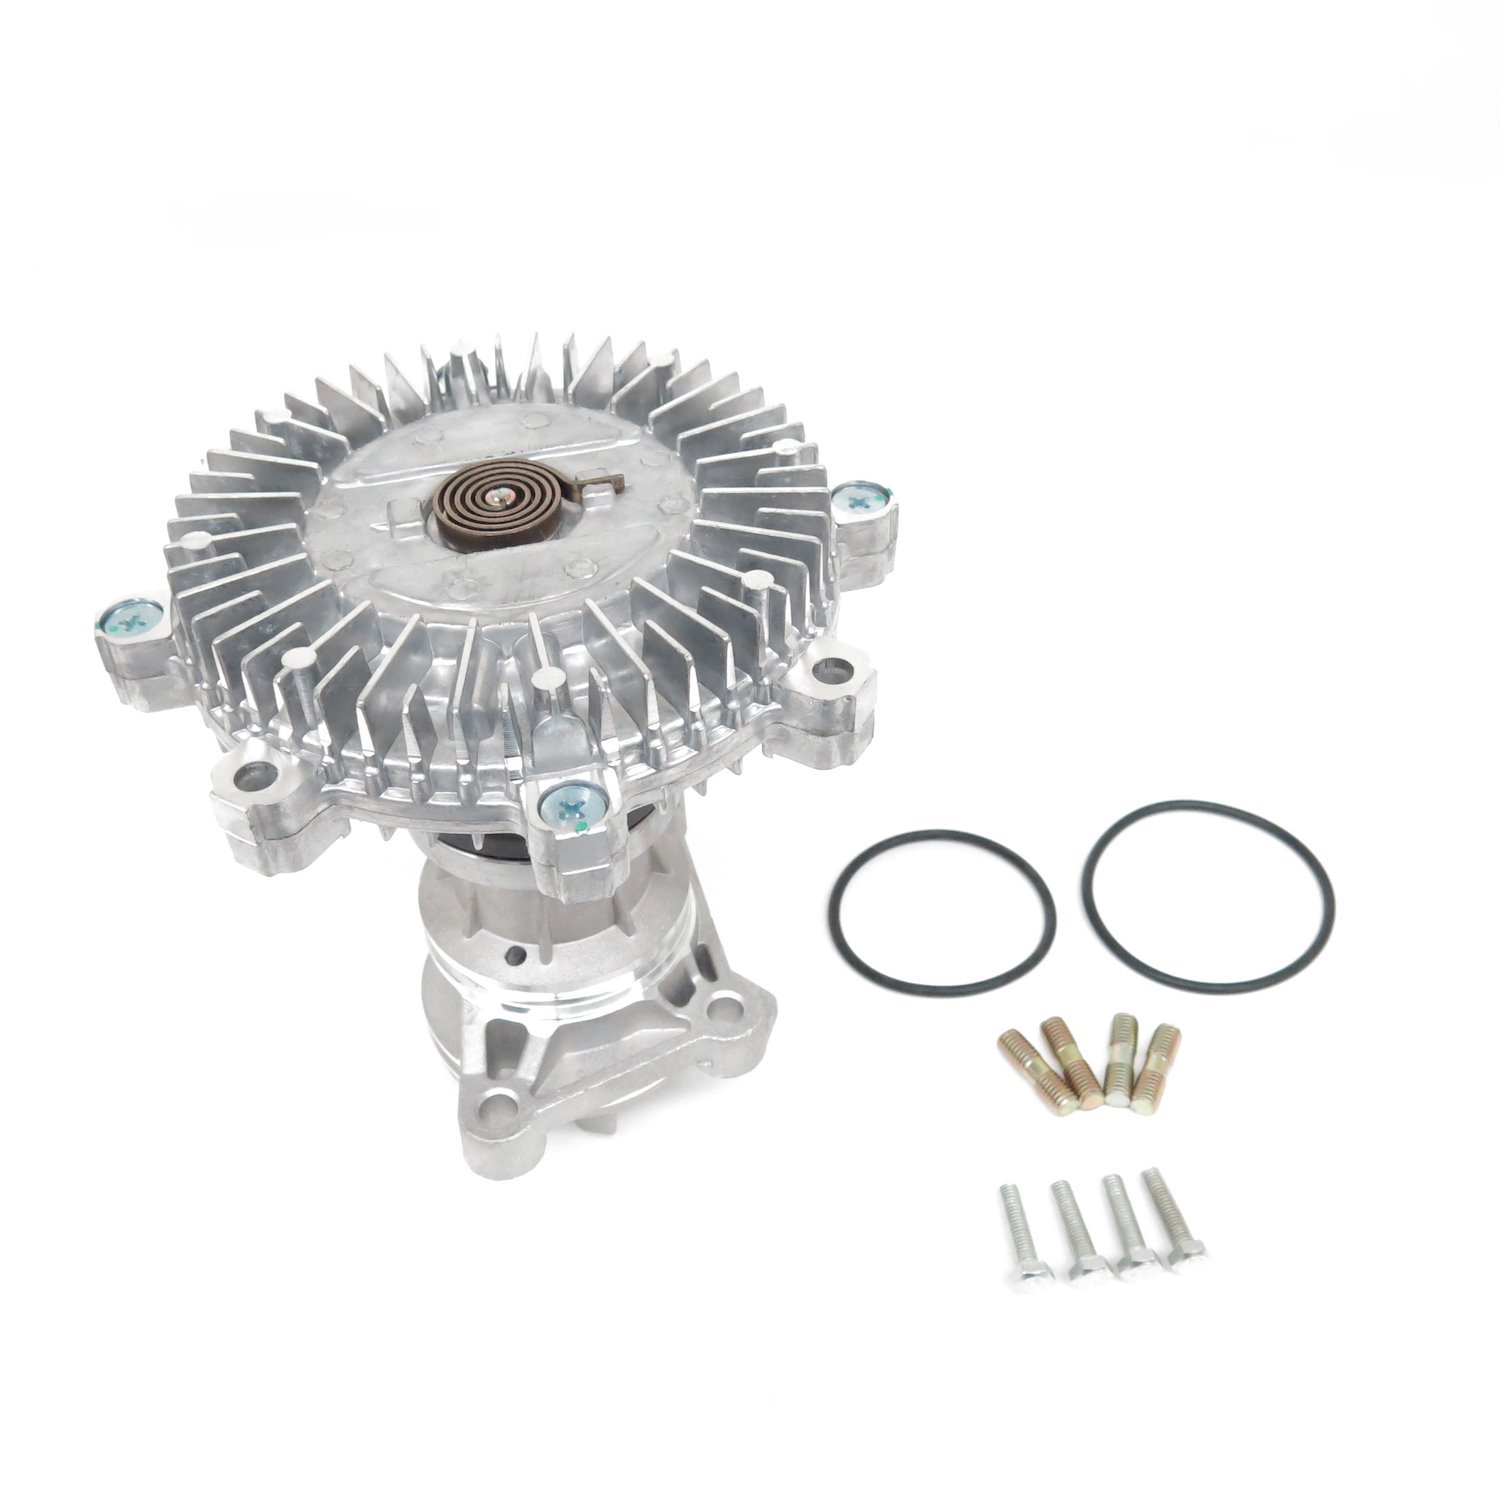 Max Cooling Water Pump Kit for Chevy/Suzuki 2.5L/2.7L V6